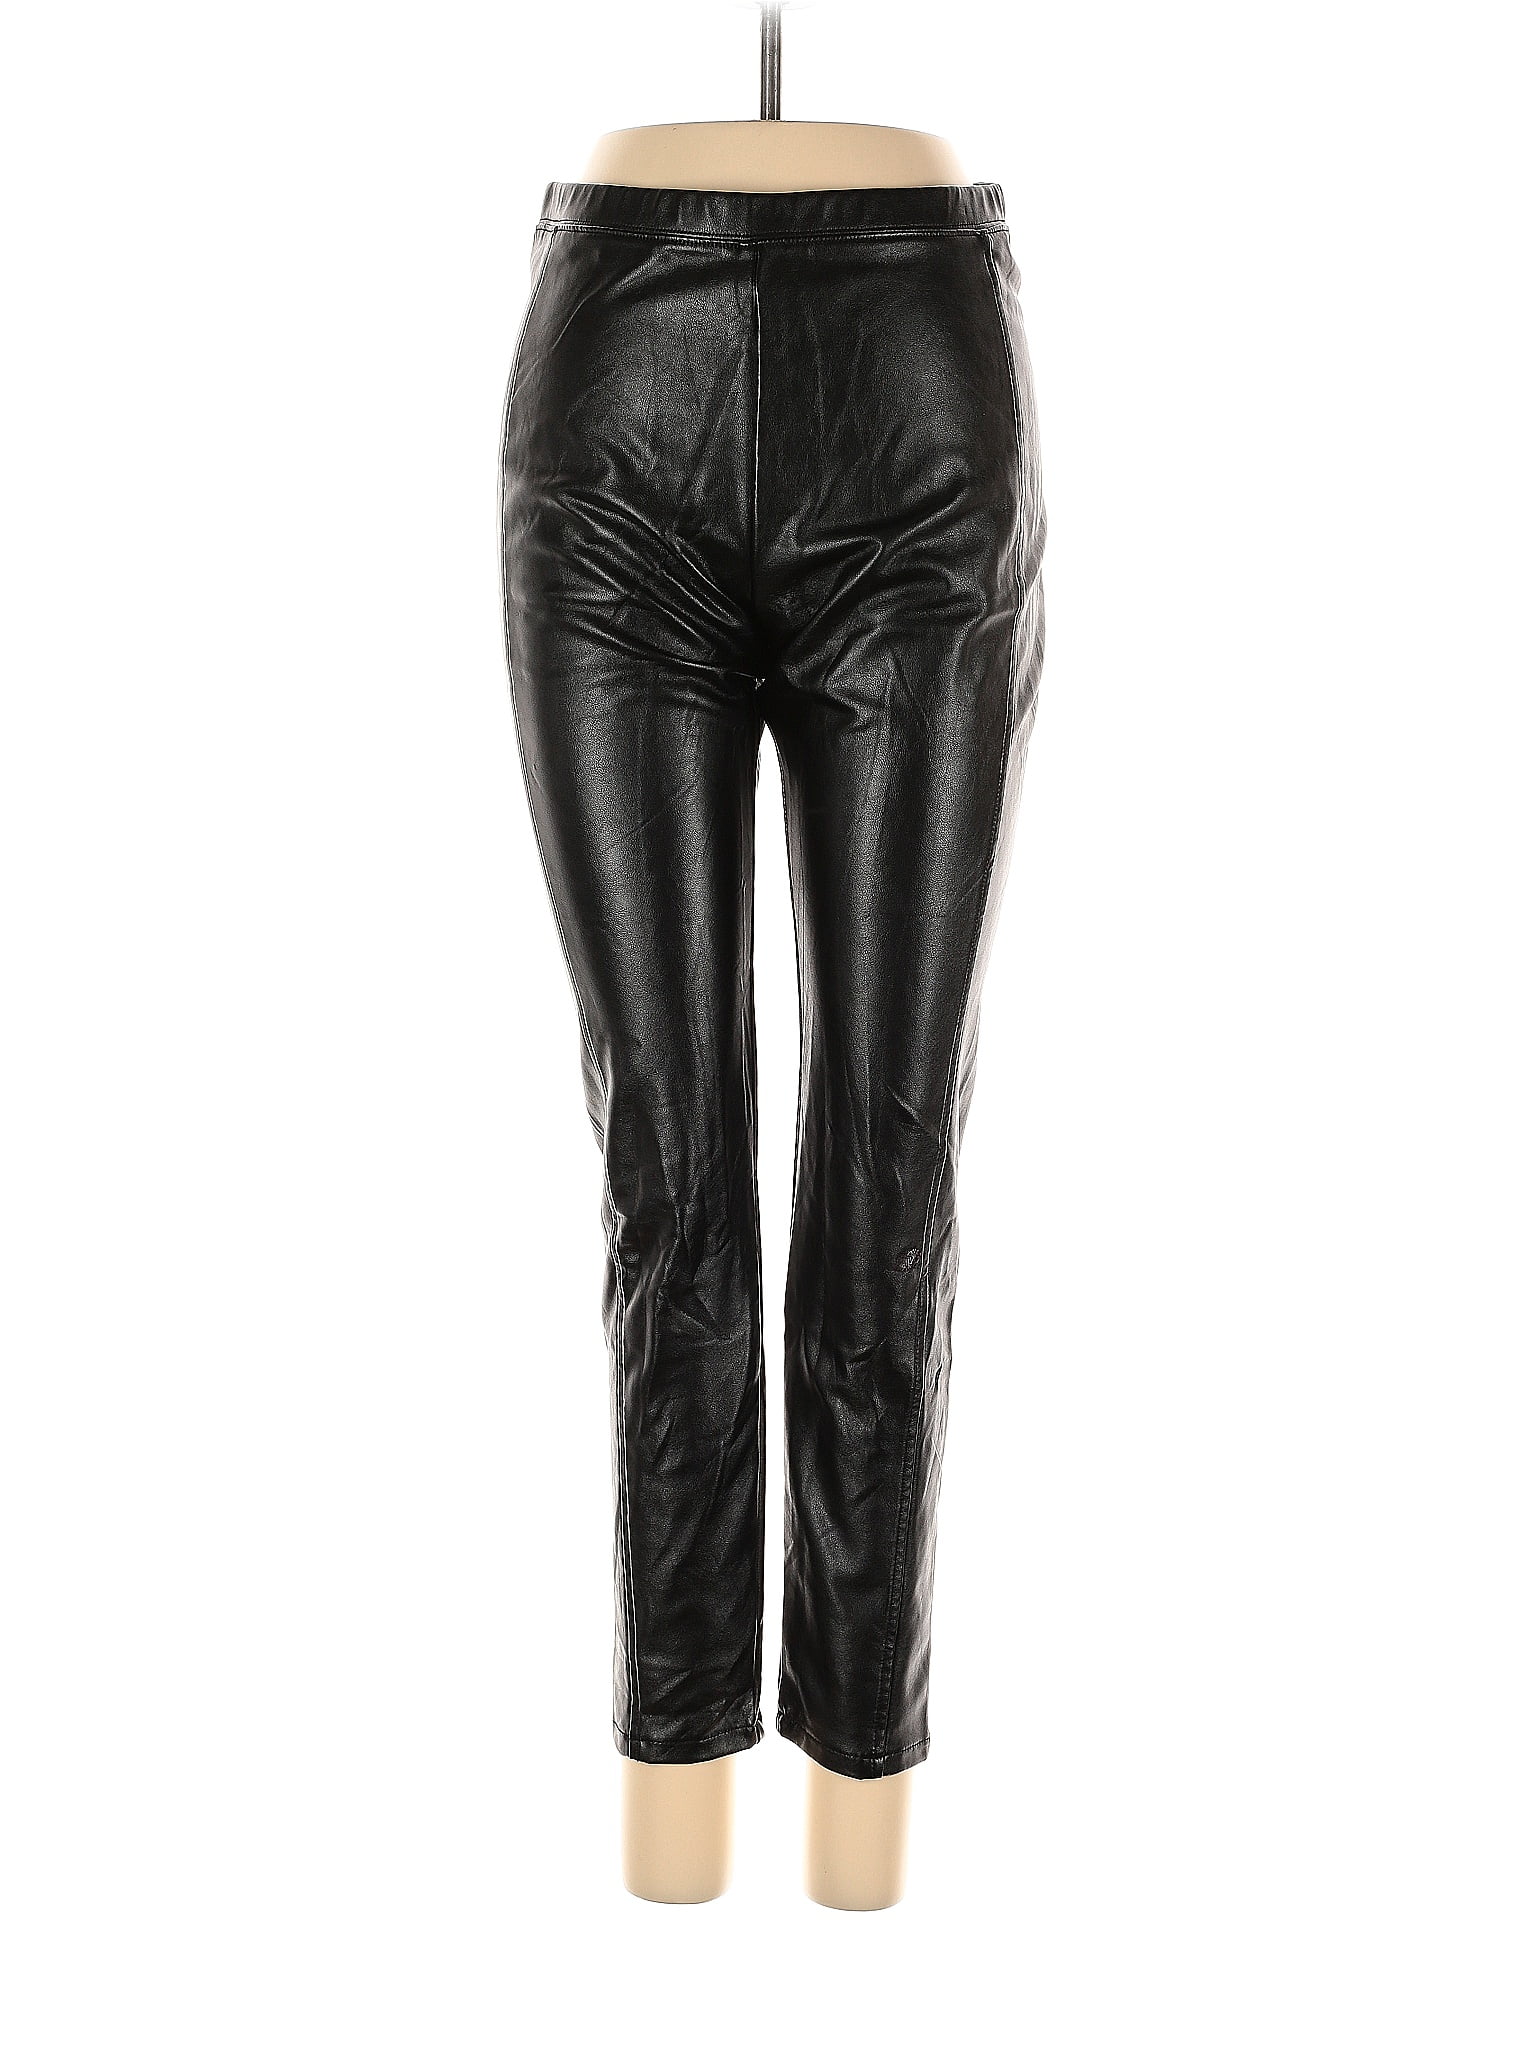 Simply Vera Vera Wang Solid Black Faux Leather Pants Size XL - 72% off